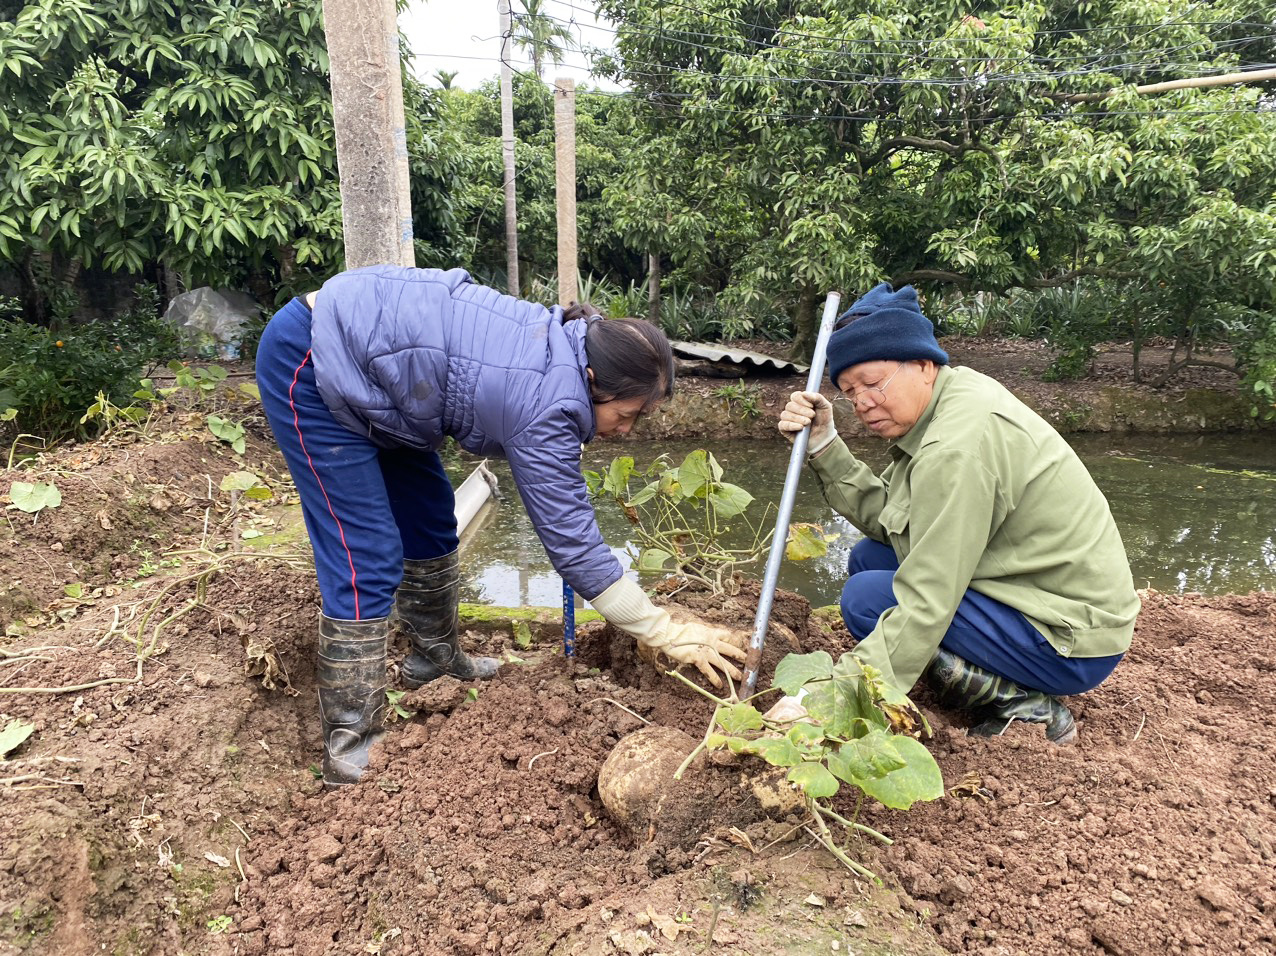 Tran Van Liem (R) and his family member harvest giant jicama in their garden in Thanh Ha District, Hai Duong Province, northern Vietnam. Photo: M.Nguyet / Tuoi Tre